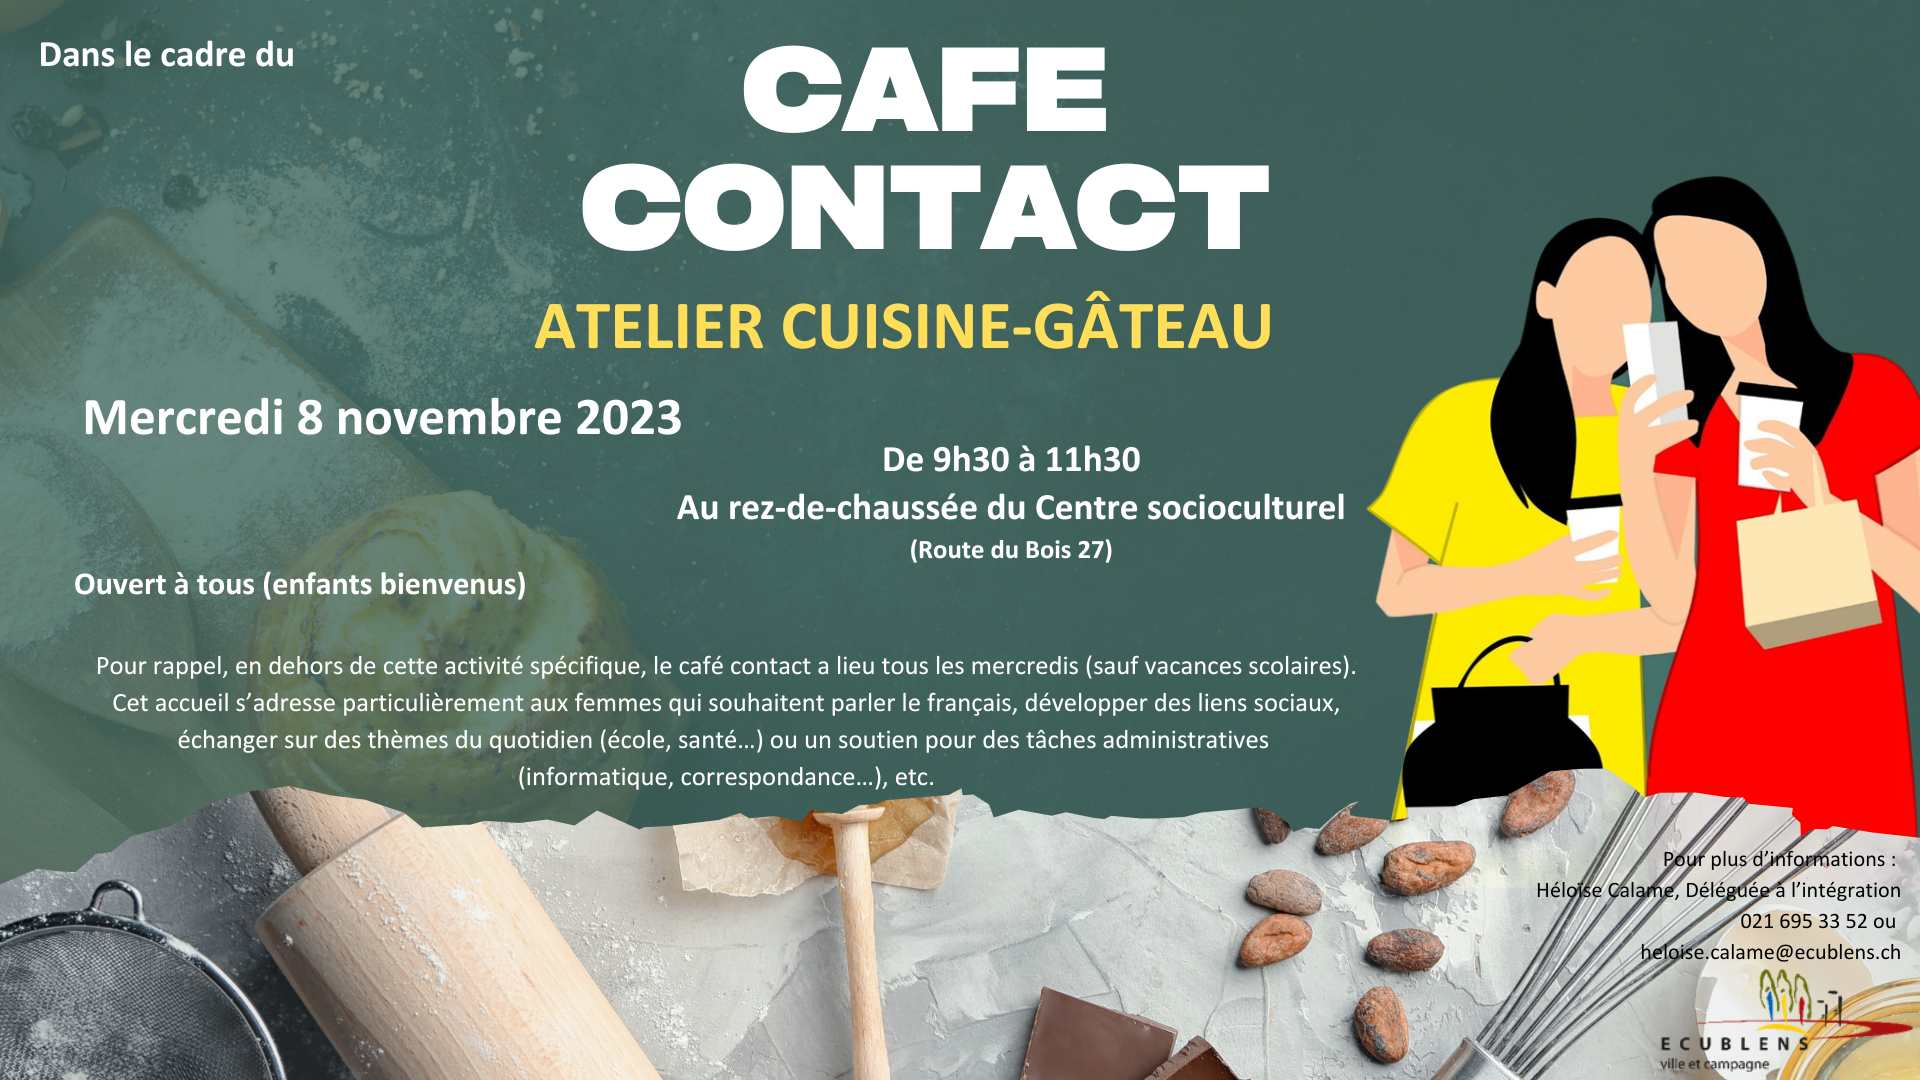 Cafe contact 2023 11 08